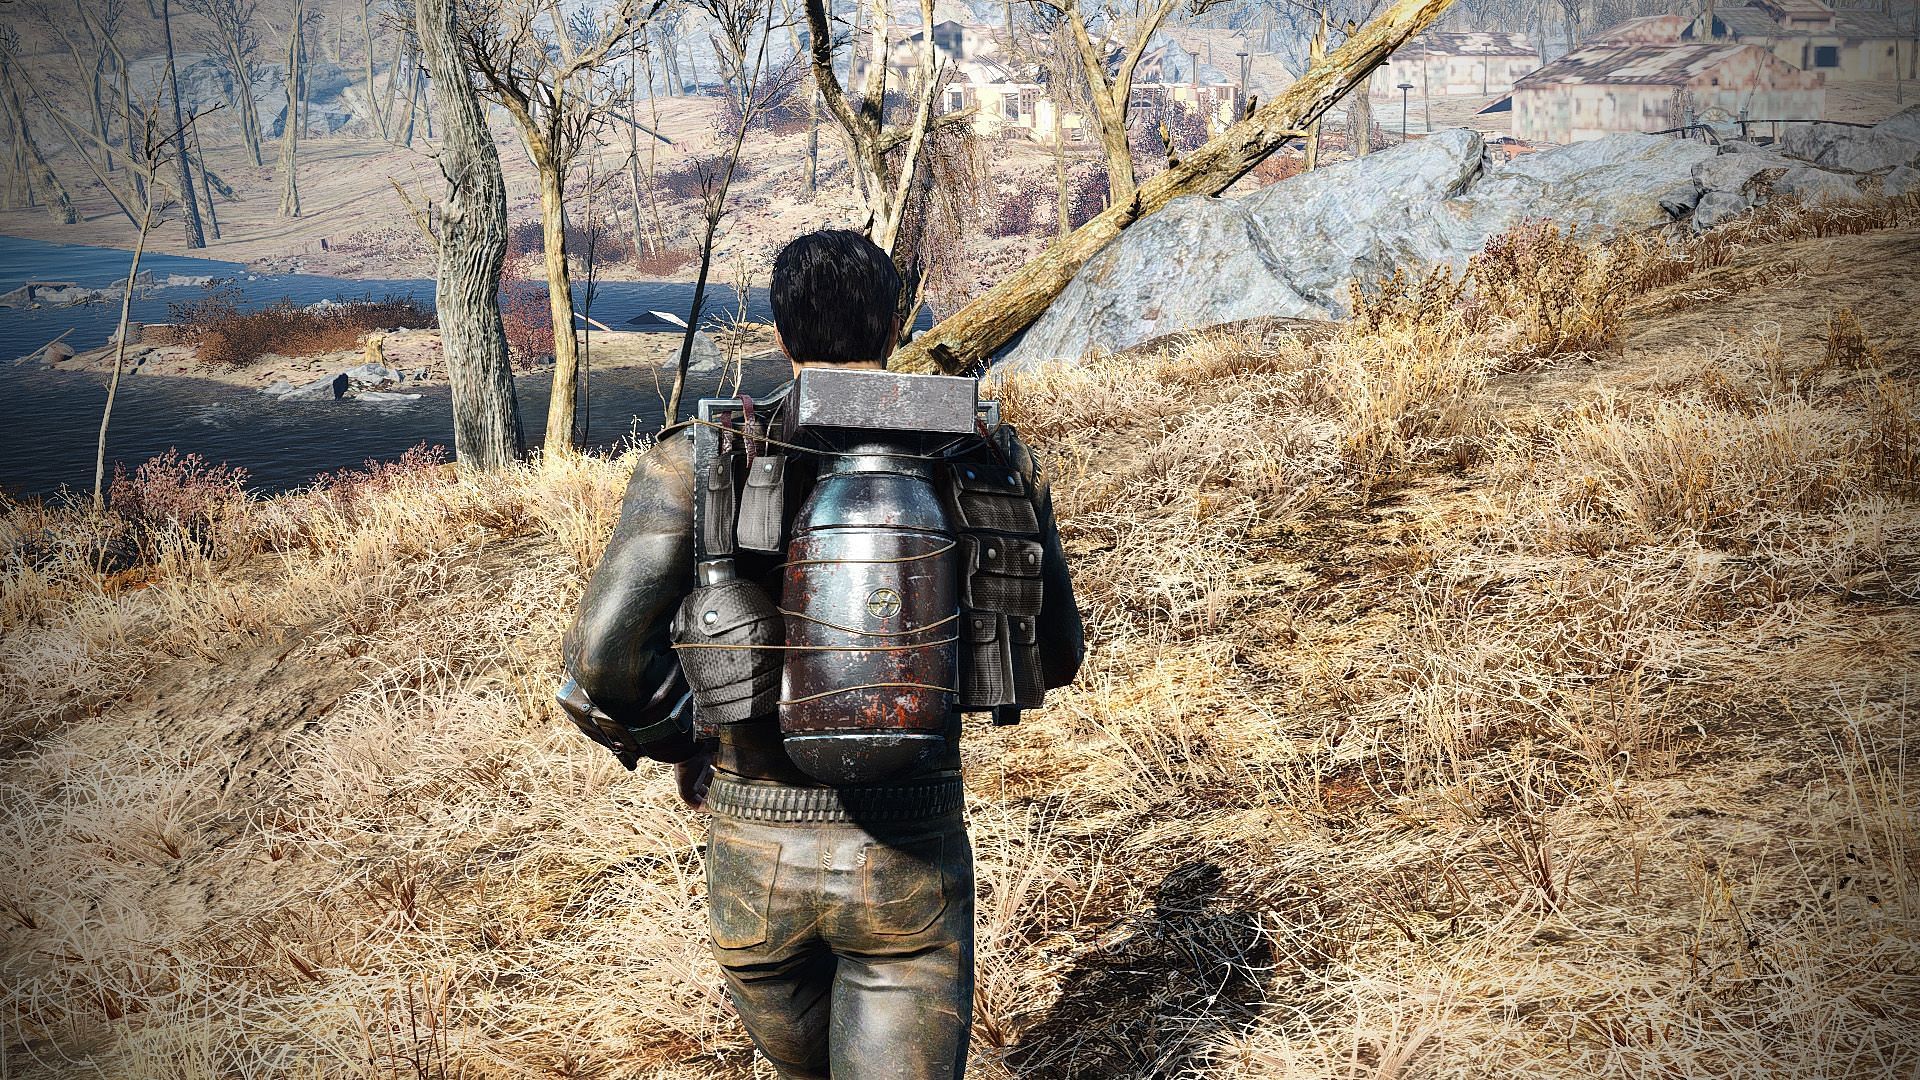 Fallout 4 is one of Bethesda Softworks